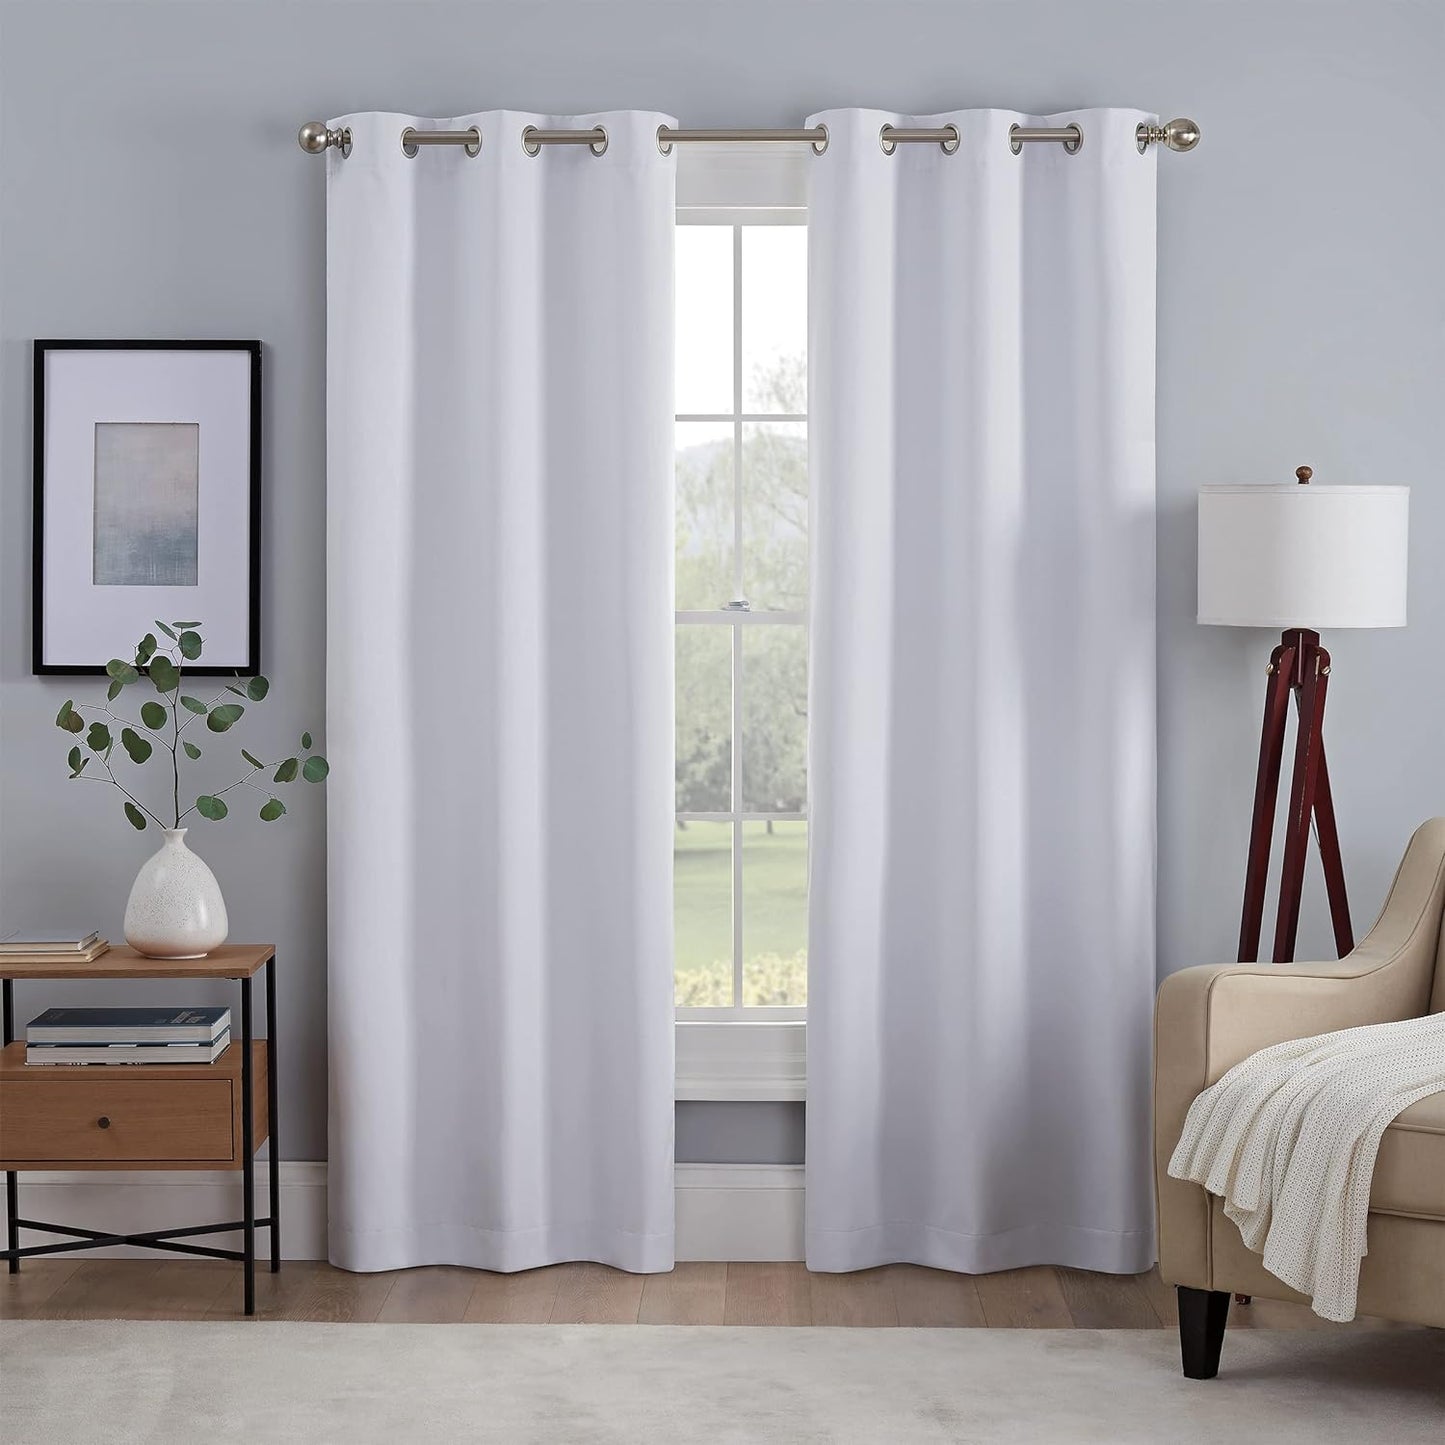 Eclipse Kylie Absolute Zero Blackout Noise Reducing Grommet Lined Window Curtains for Living Room (2 Panels), 37 in X 84 In, Grey  Keeco LLC White 37 In X 63 In 